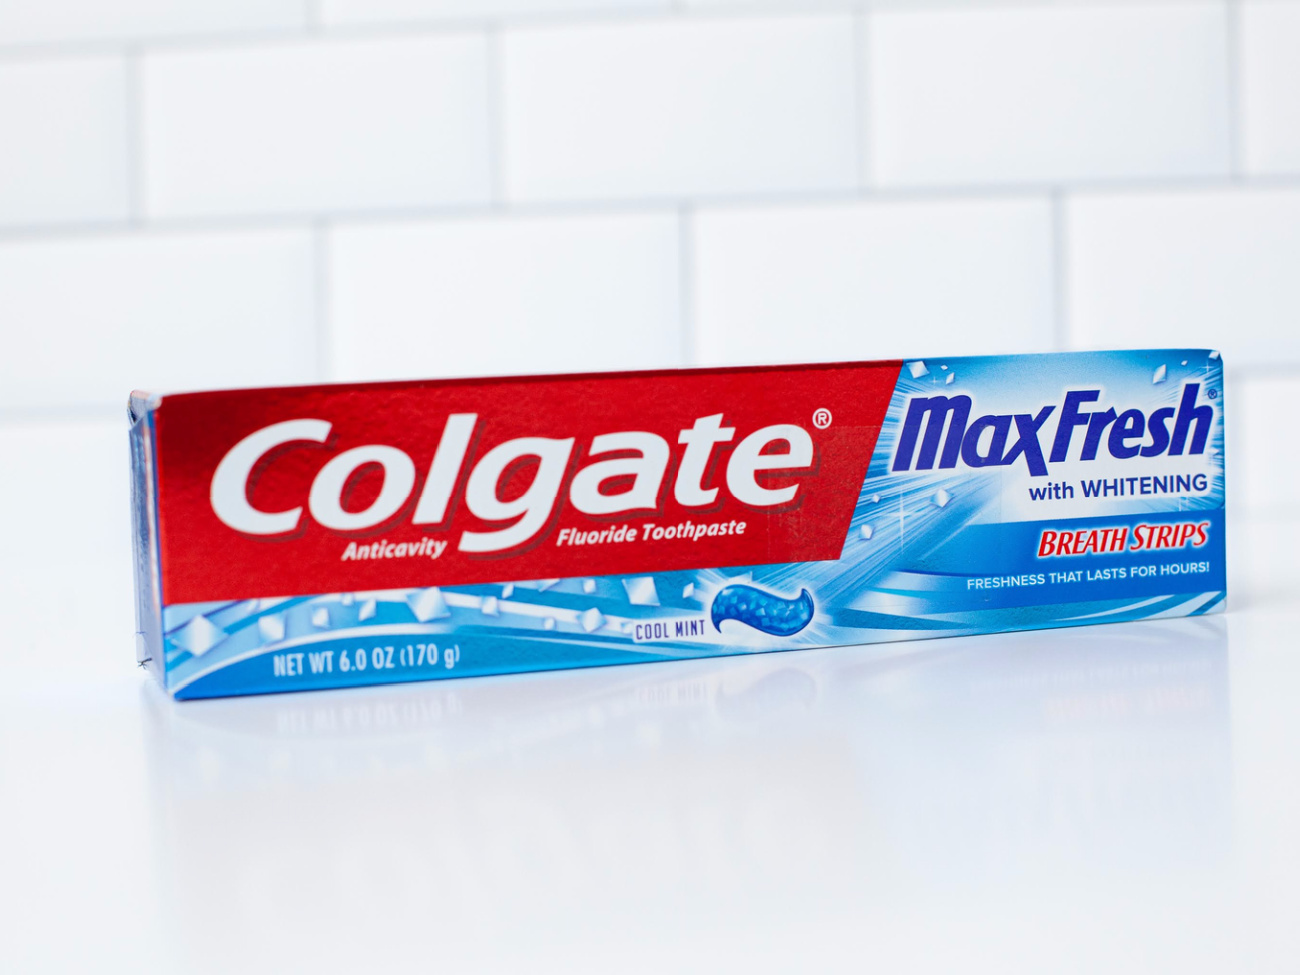 Colgate MaxFresh Toothpaste As Low As 29¢ At Kroger – Ends 12/6